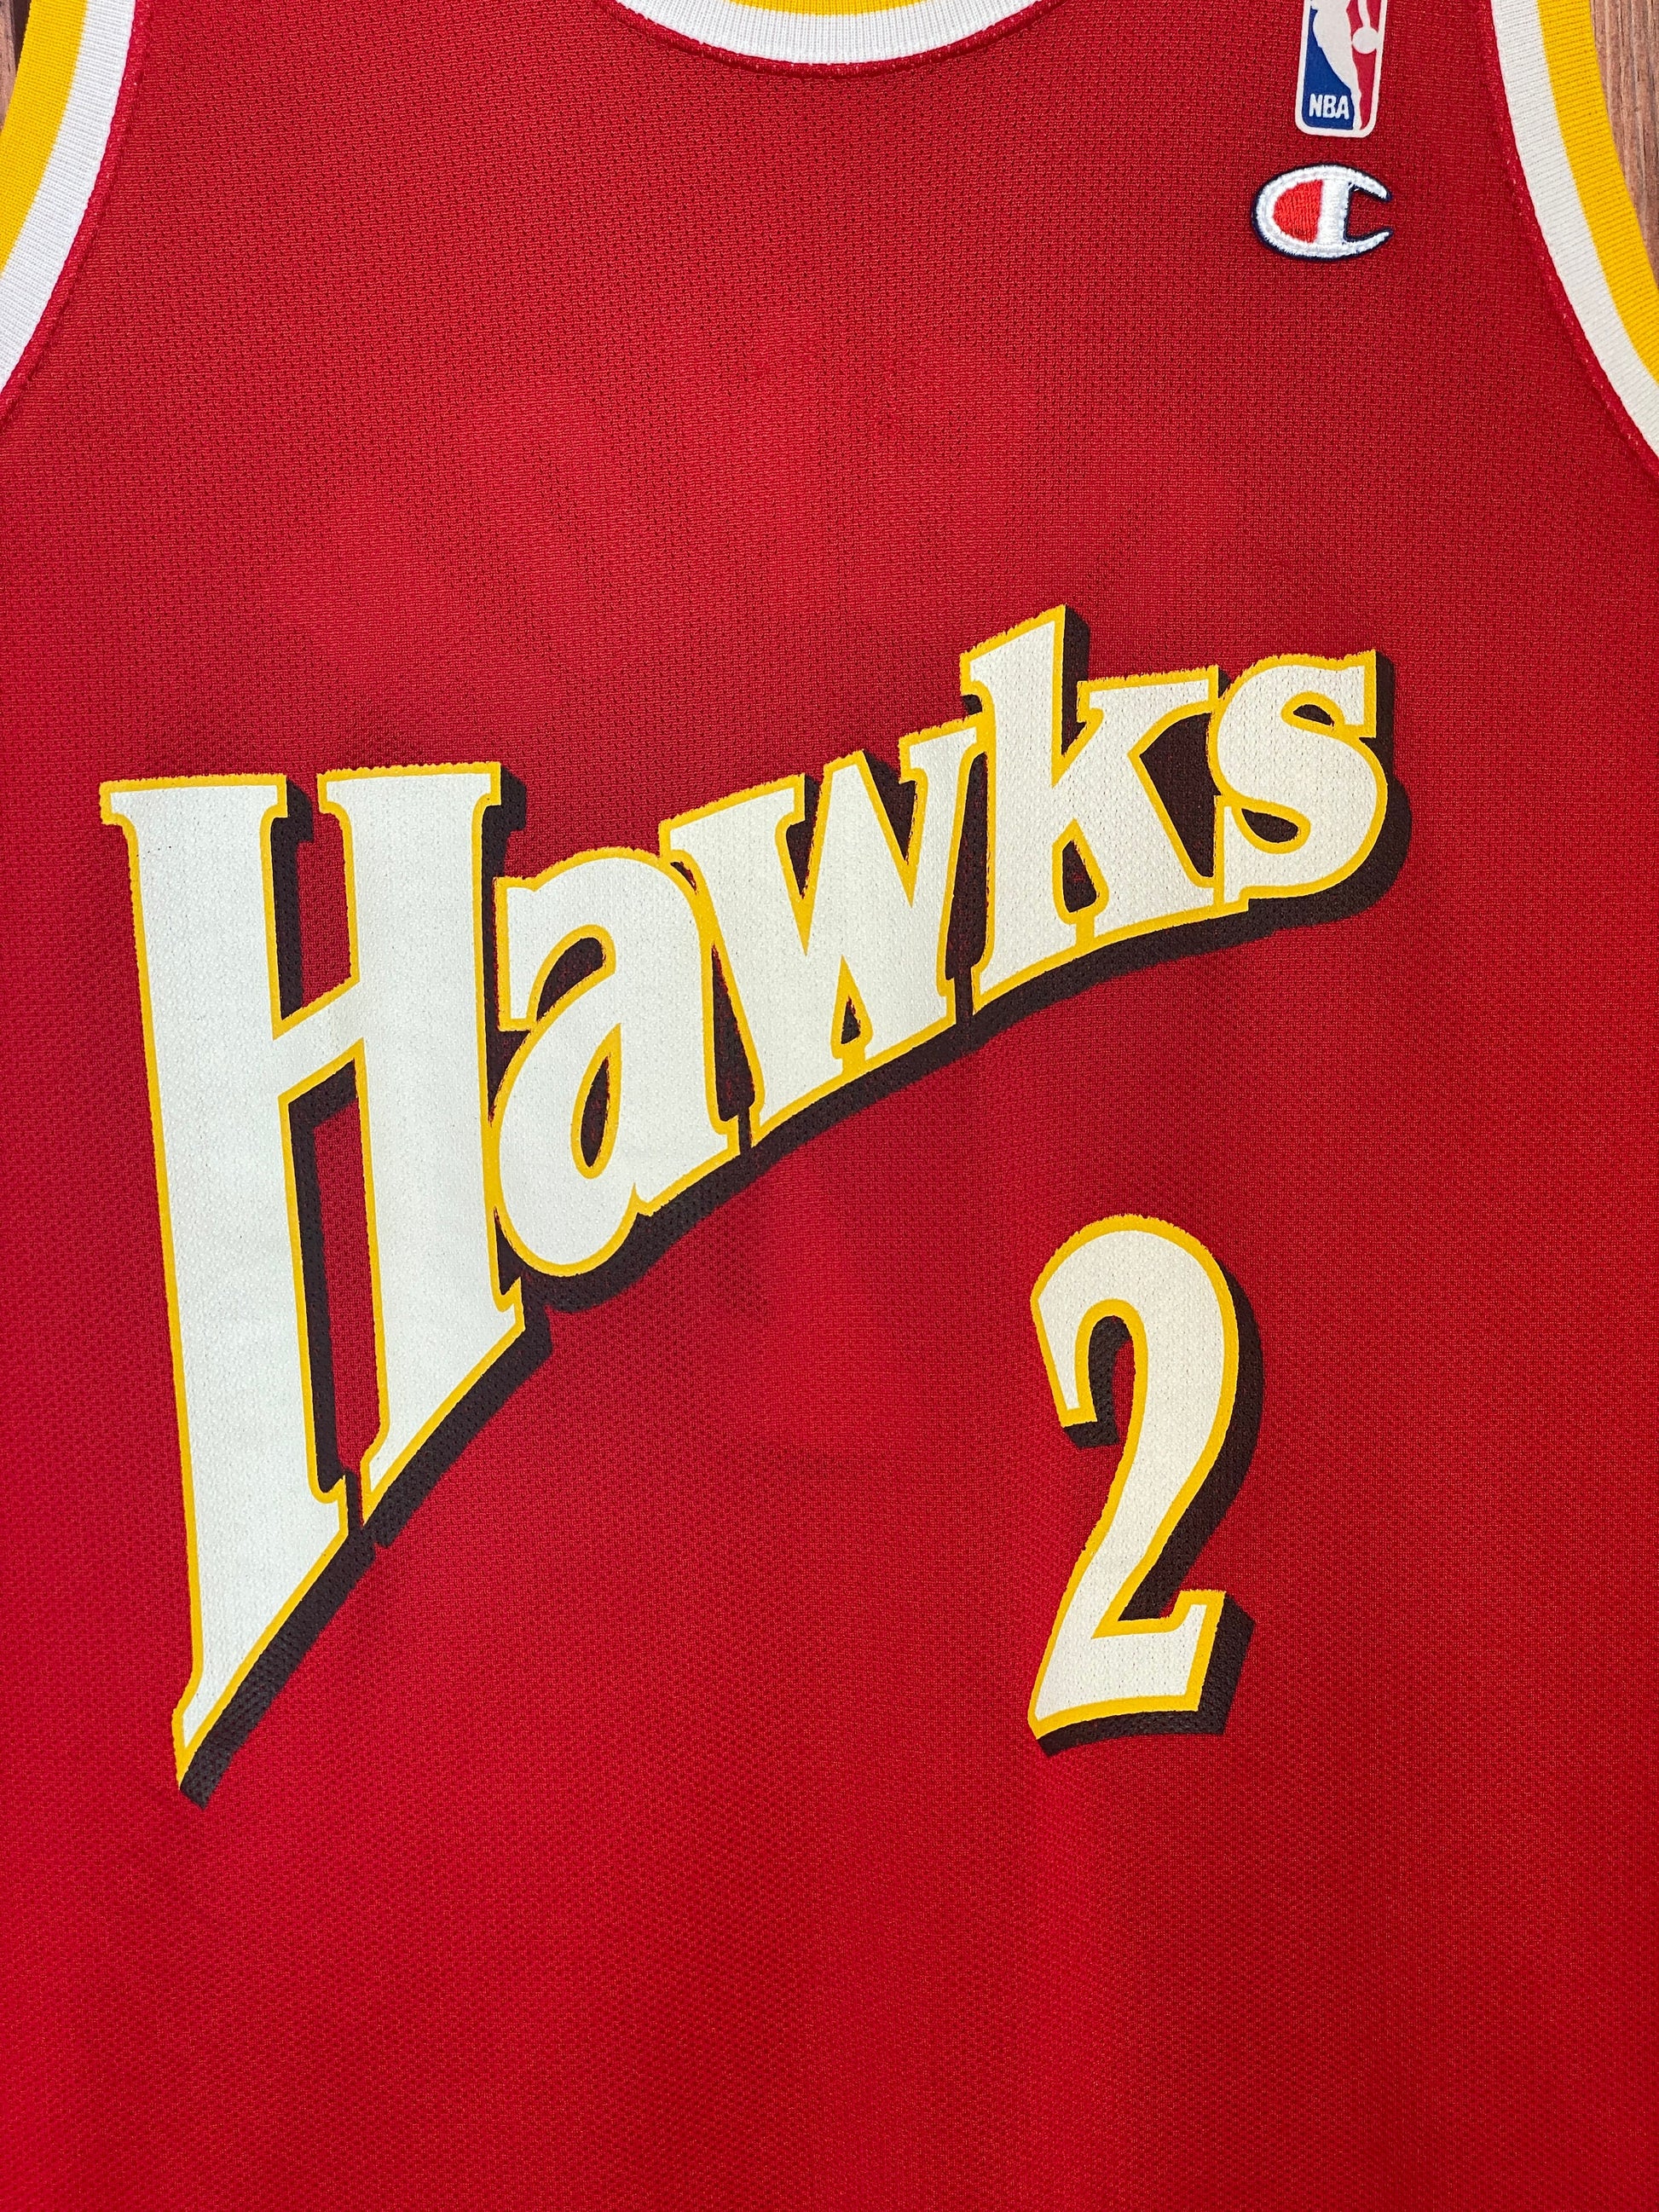 Size 48 Stacey Augmon #2 Hawks 90s Vintage NBA Jersey - Made by Champion in USA - Front View